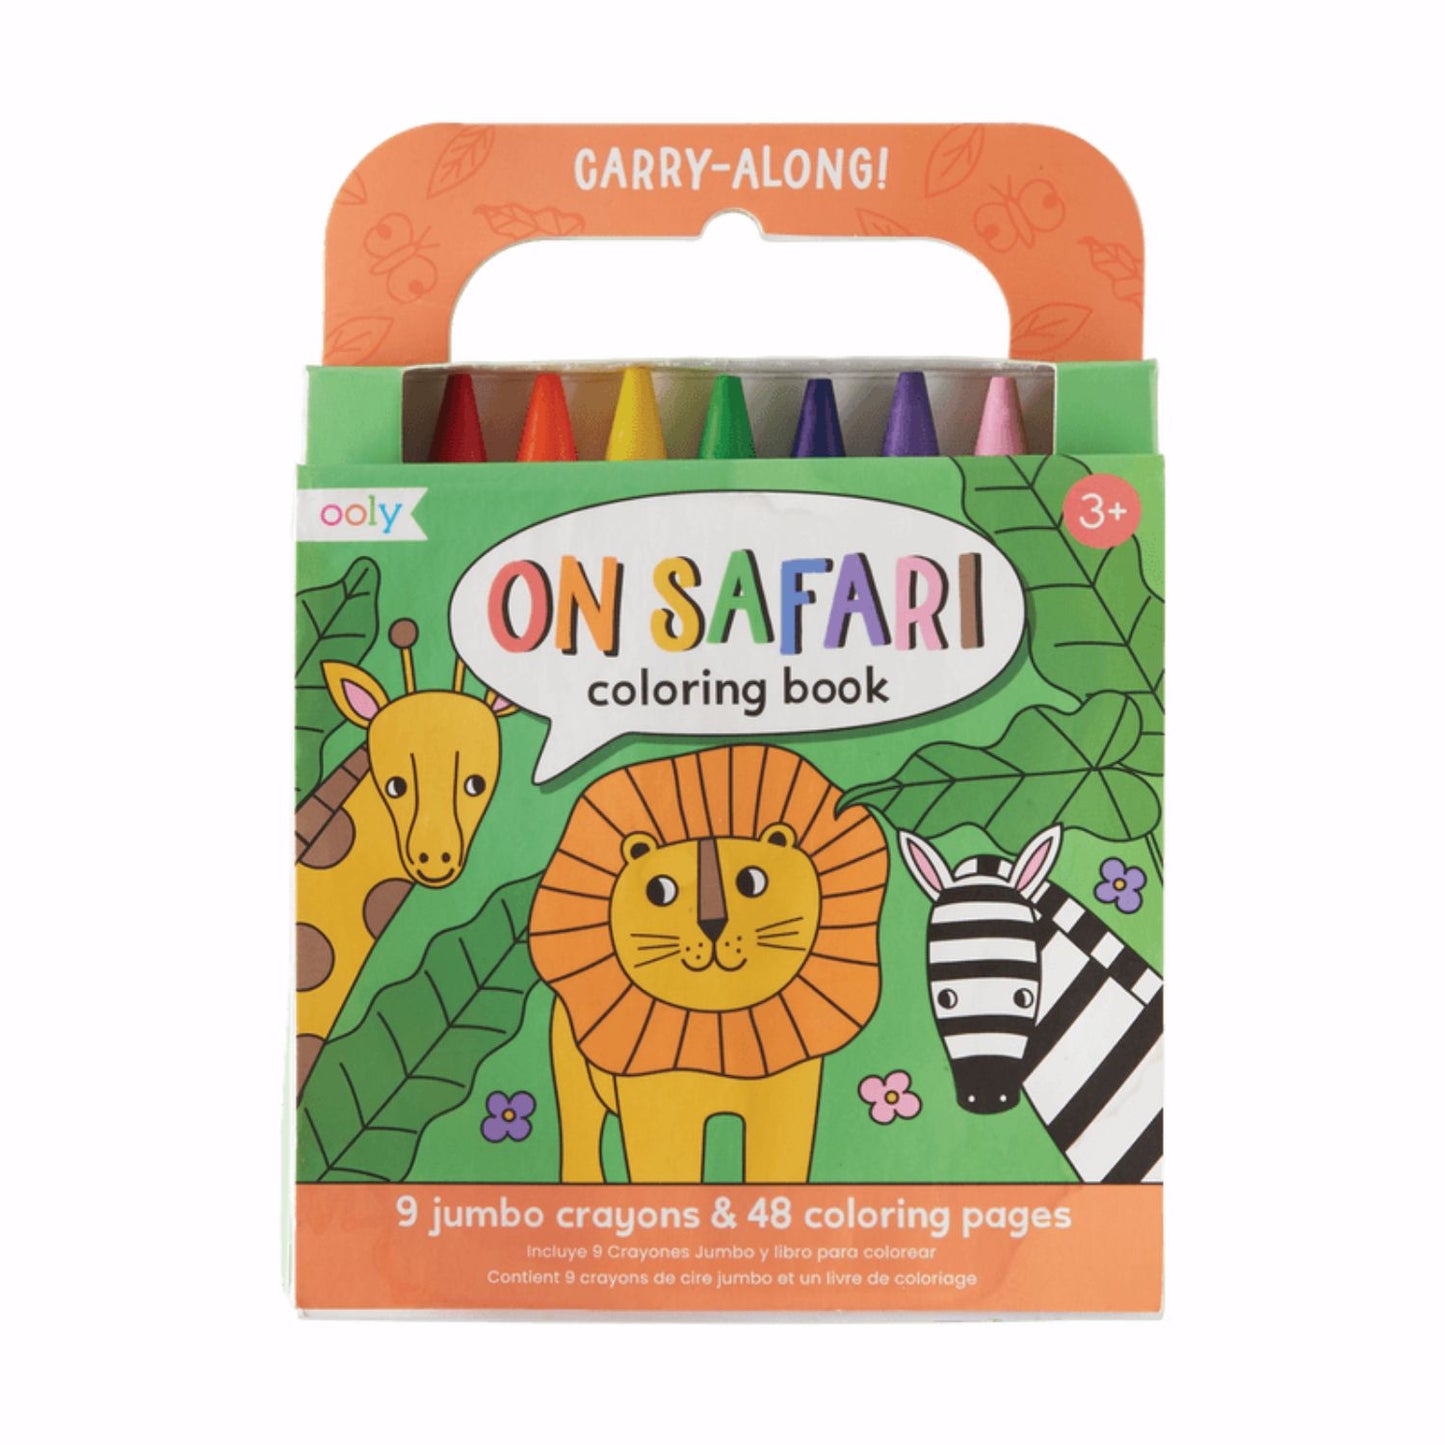 OOLY Carry Along Coloring Book Set - On Safari